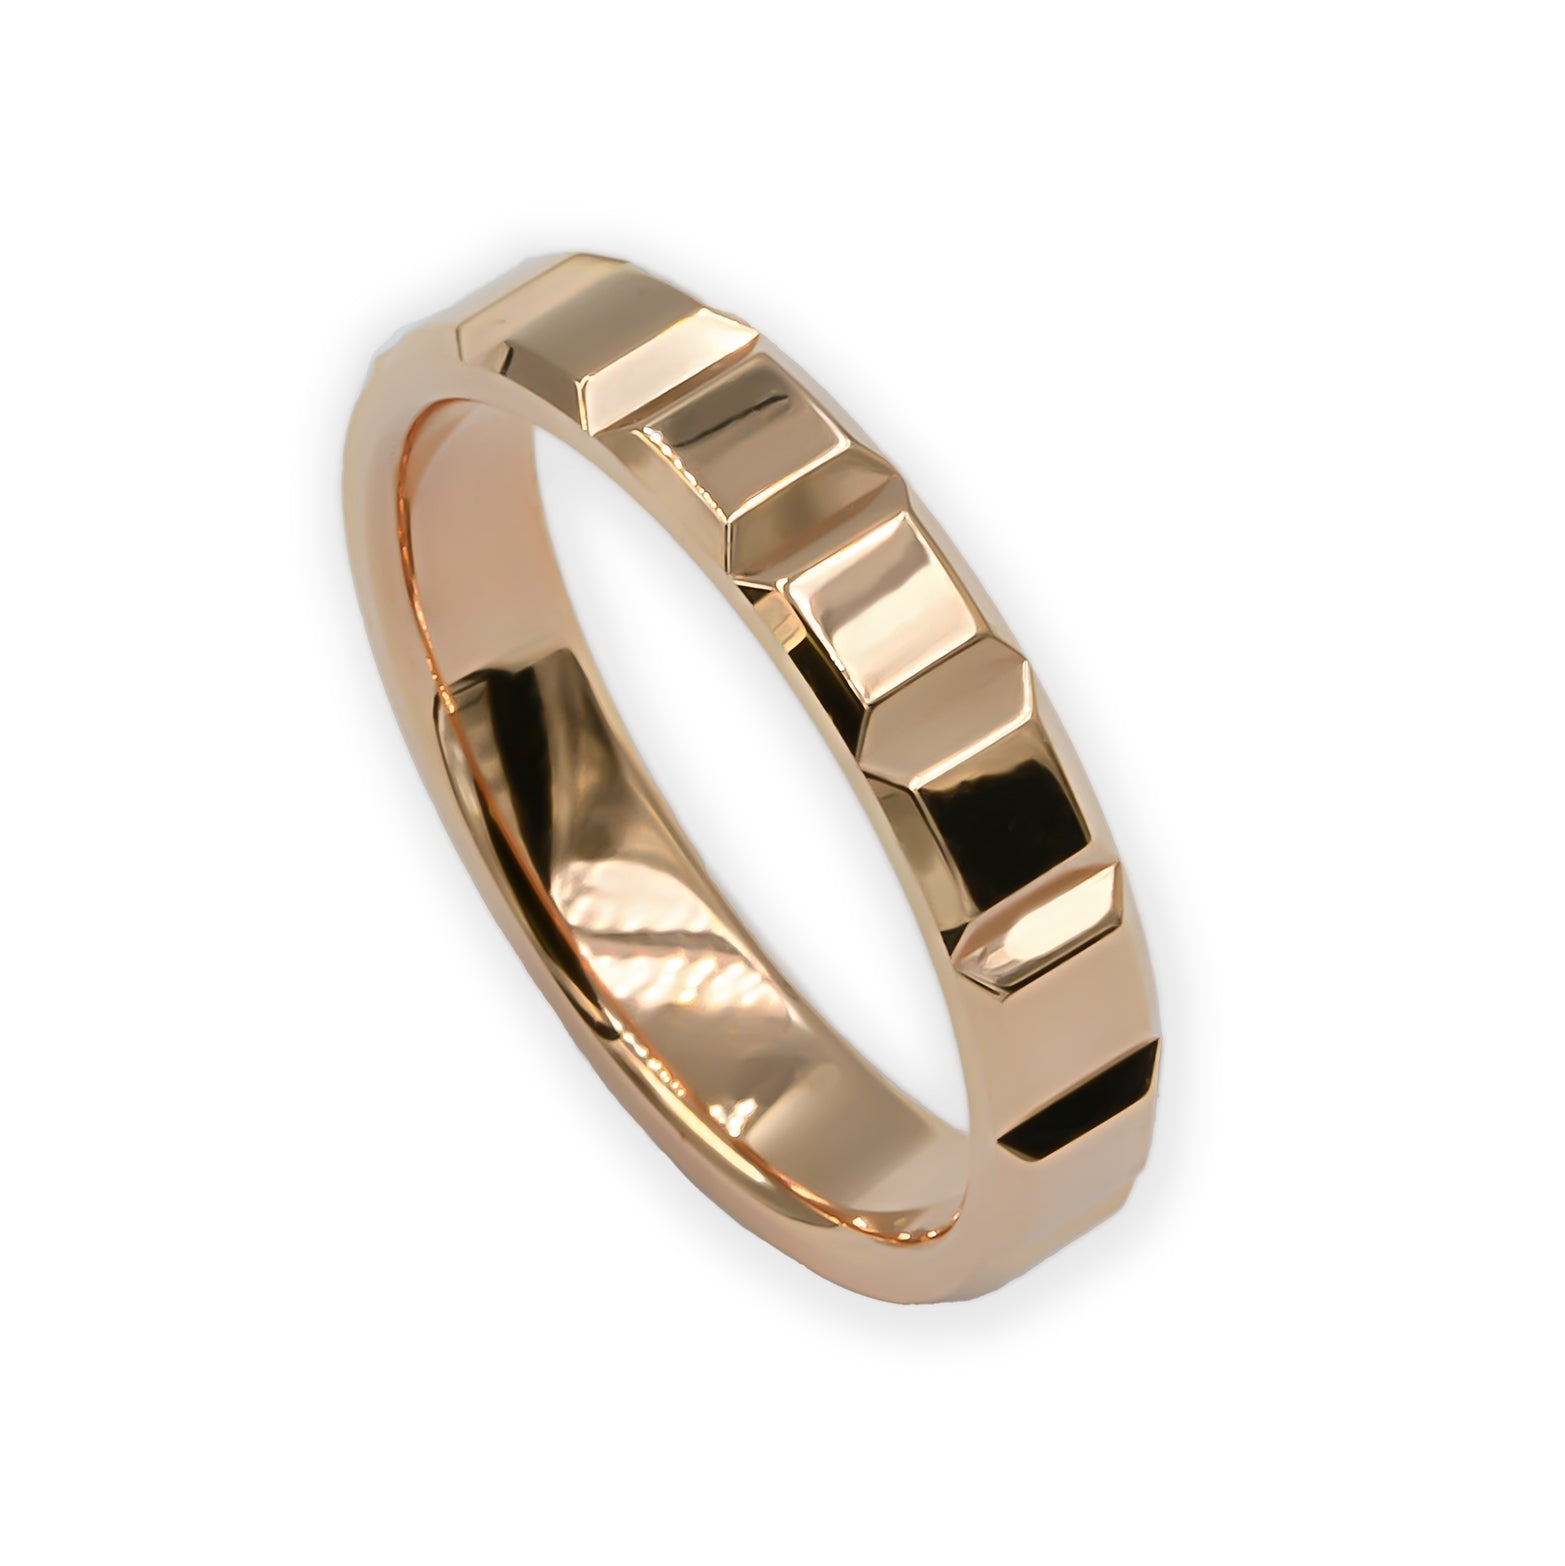 Ring CRUSH 4mm square shape red gold 18K 750